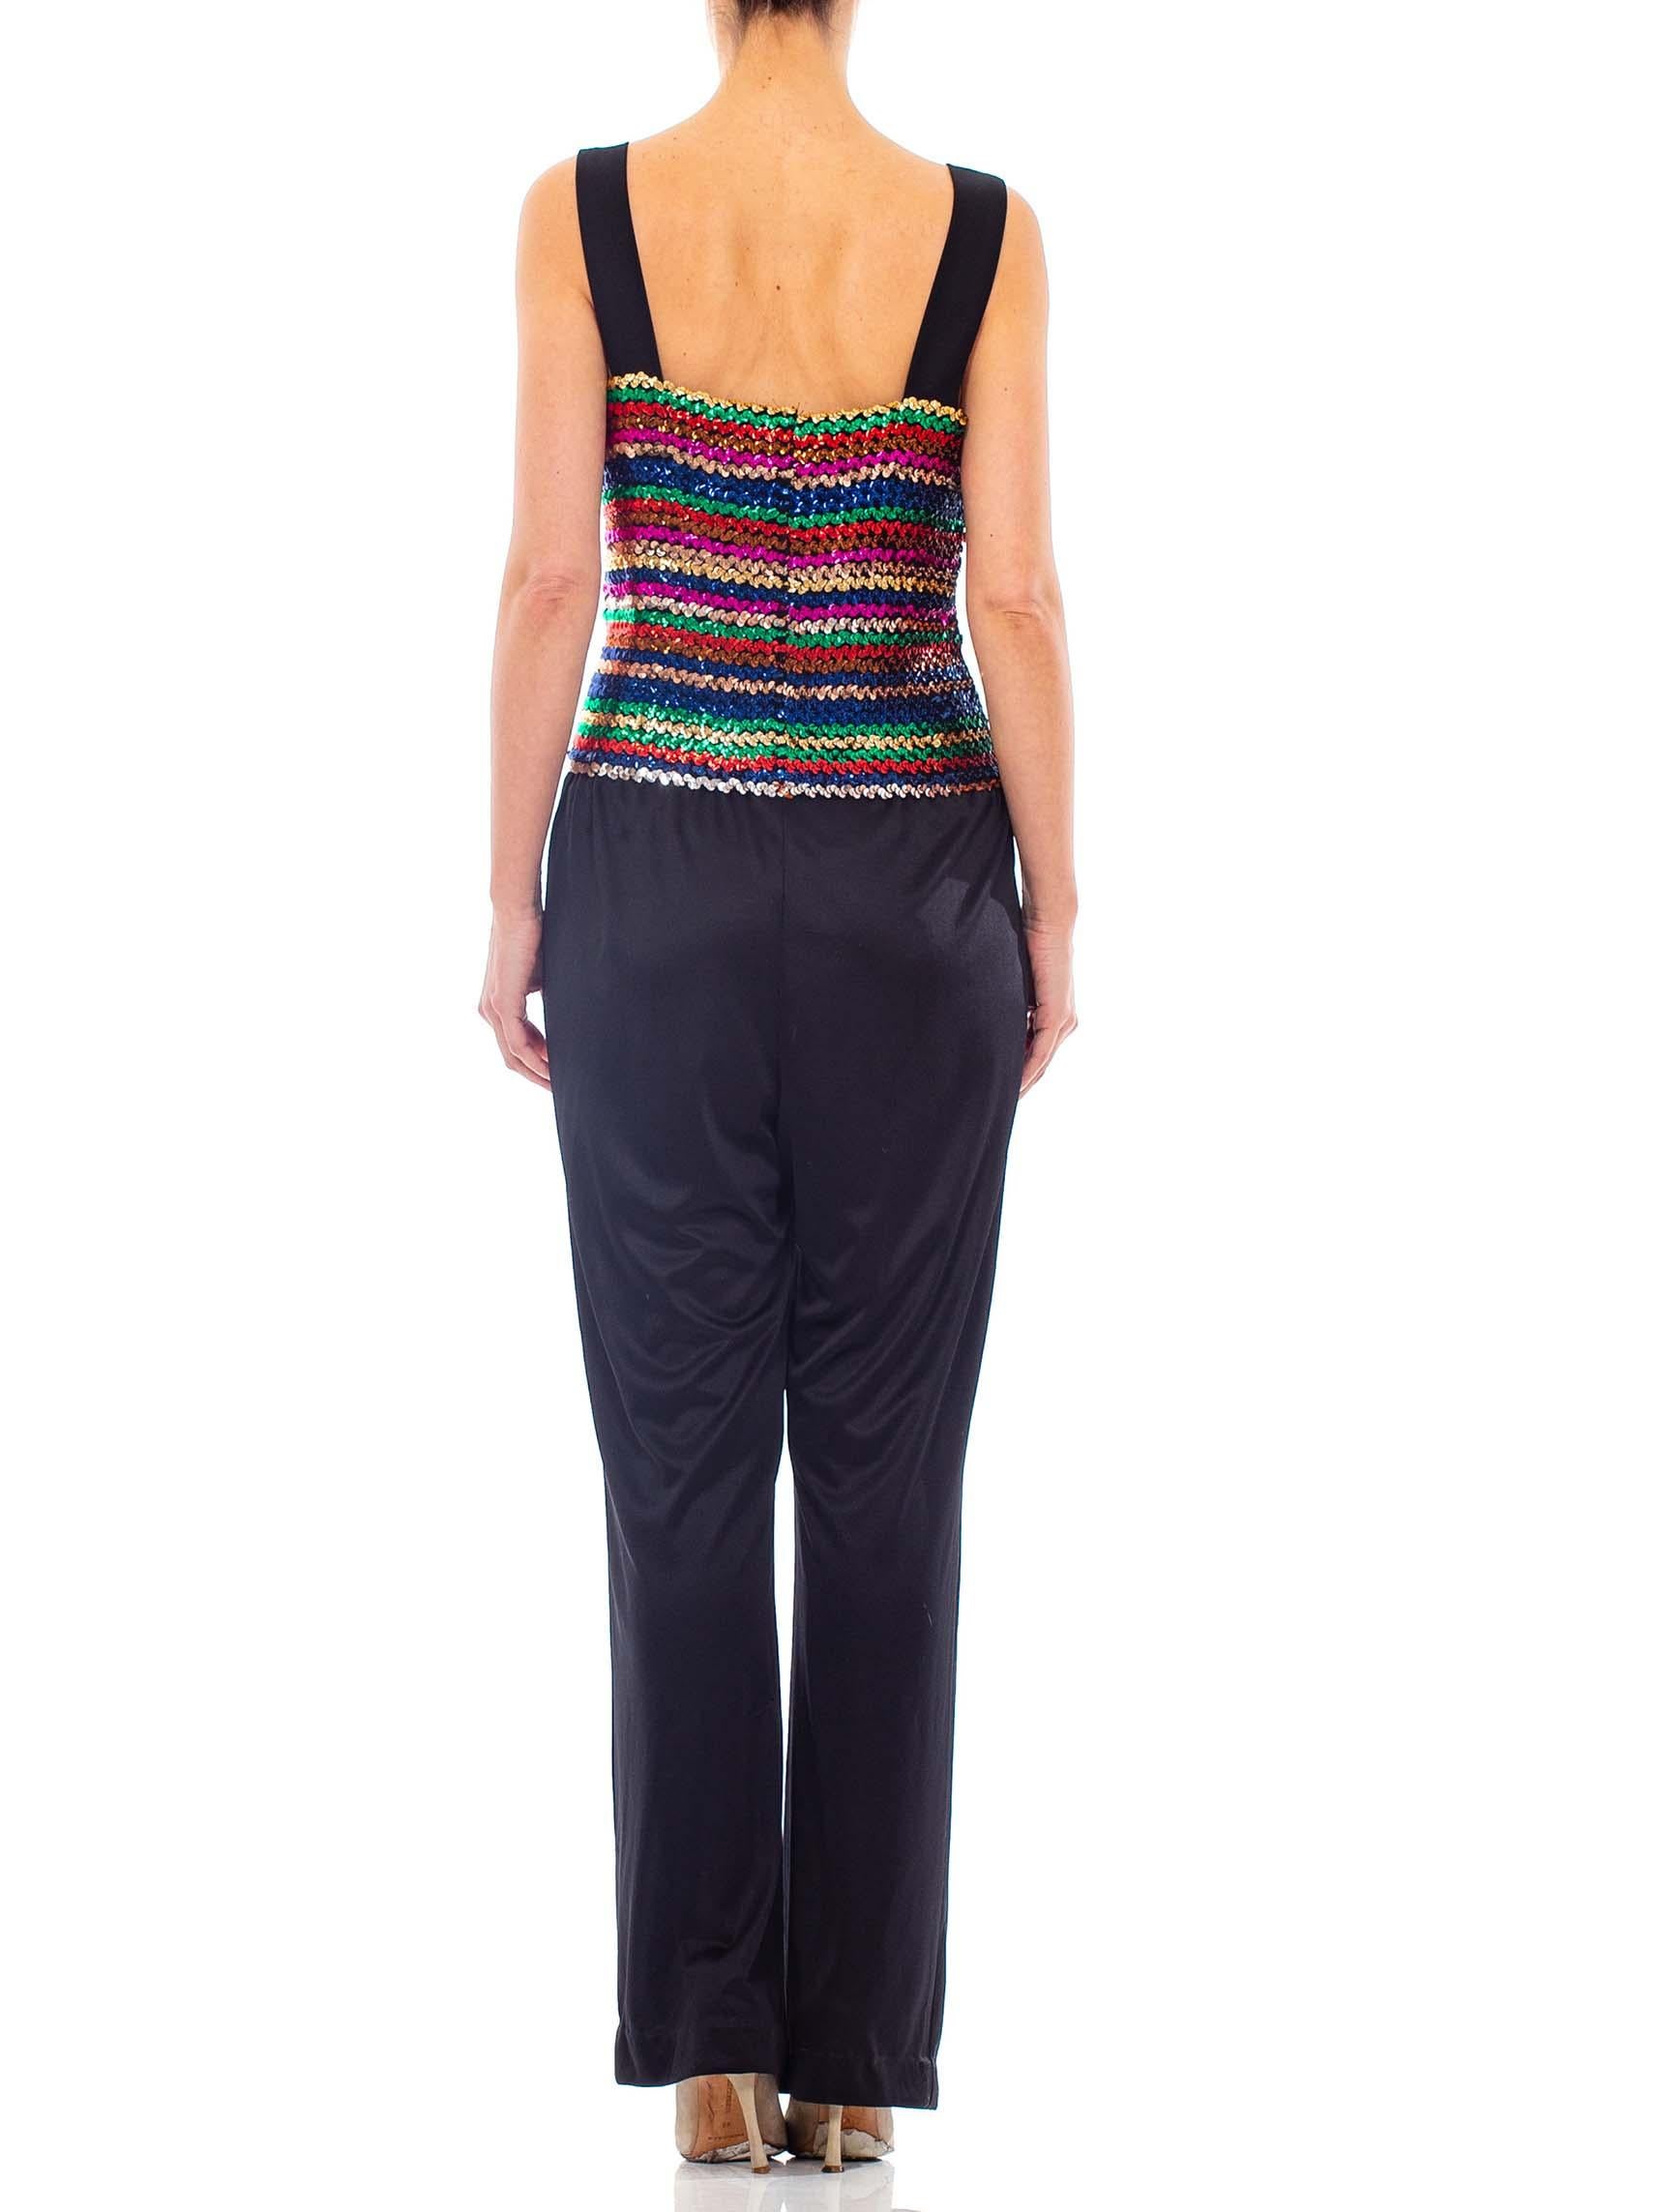 1970S Black Sequined Polyester Jersey Disco Party Jumpsuit With Vest For Sale 5